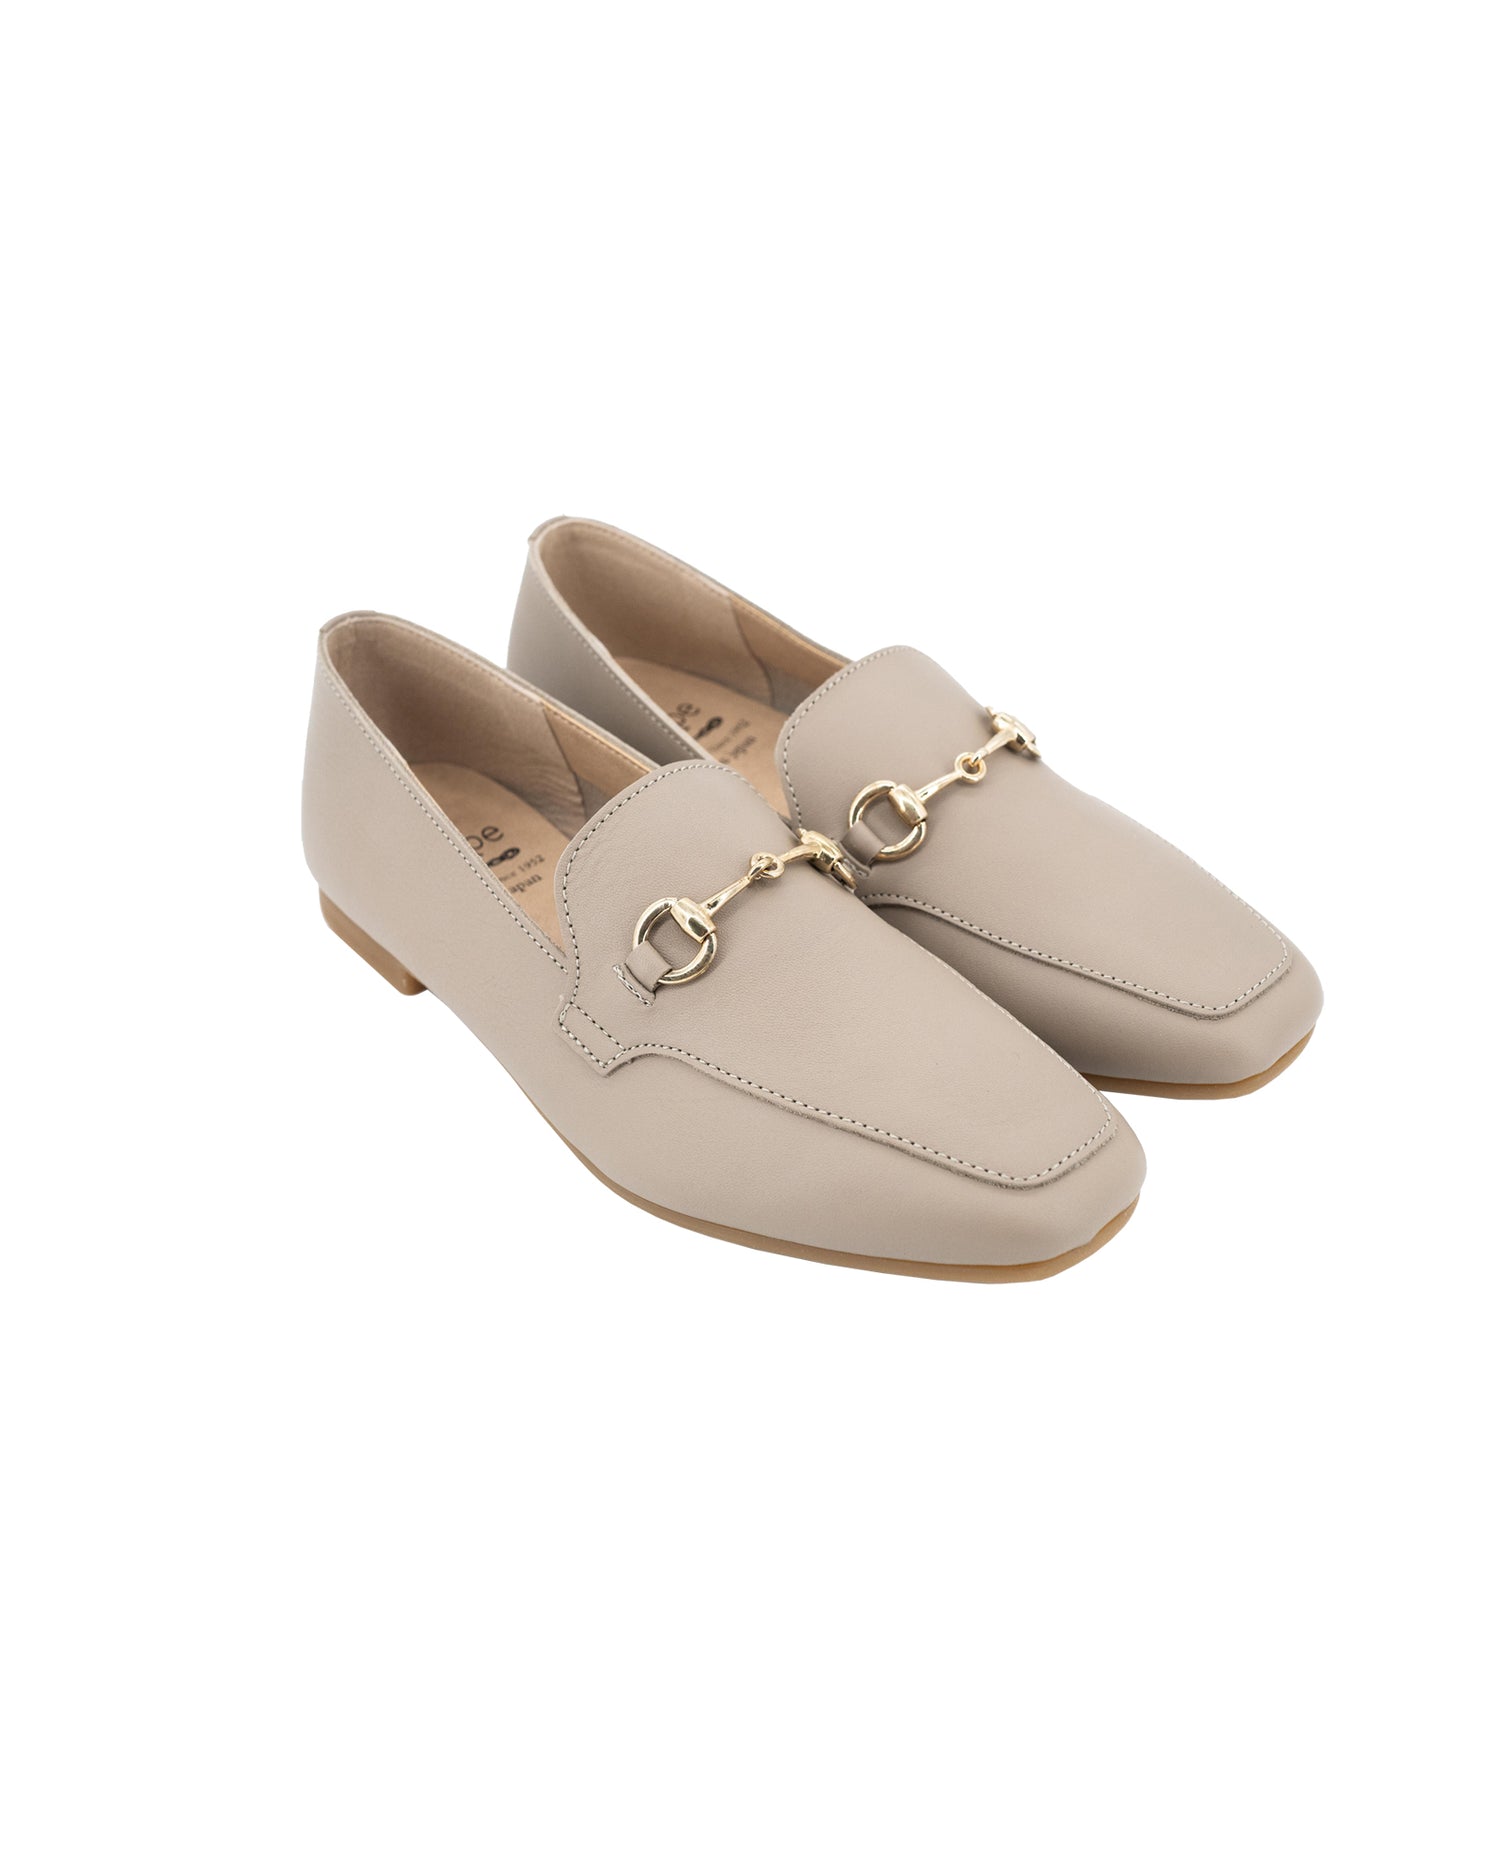 Celina Loafers - Cement Beige